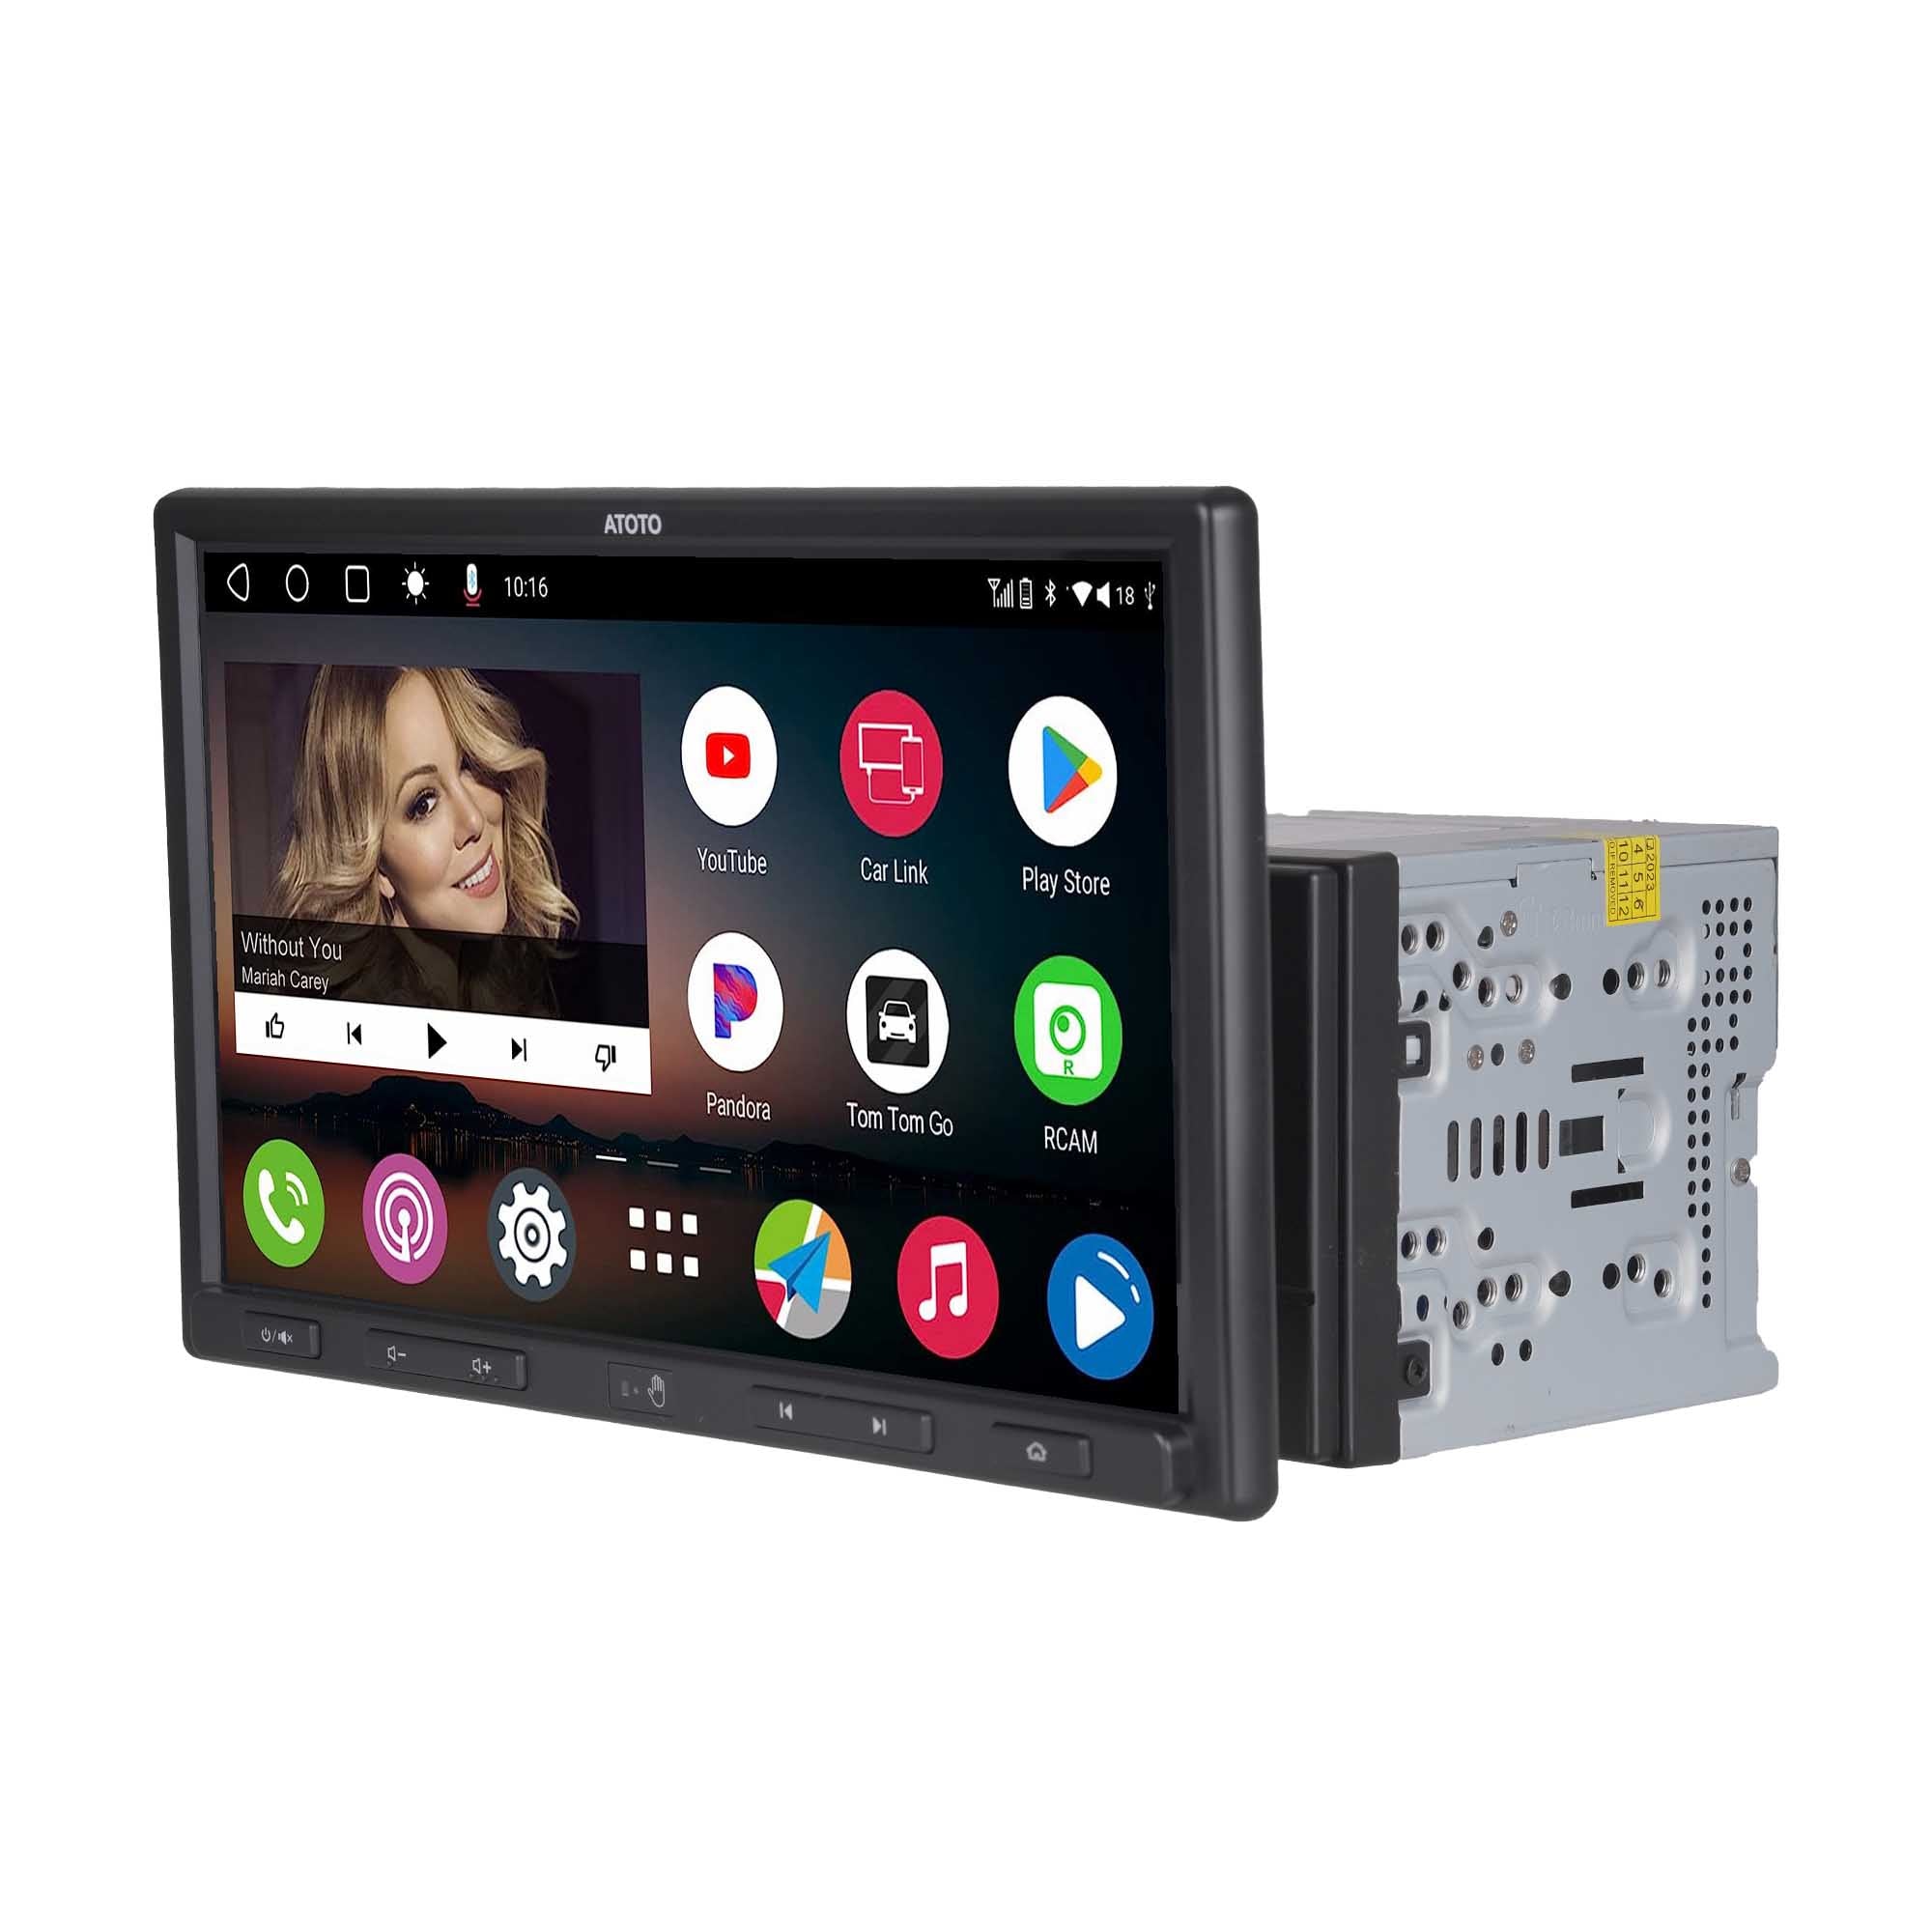 S8 Ultra Pro 10.1 Android Double Din Headunit | 6 GB RAM | 128 GB ROM | QLED Display | Hand-Gesture Navigation